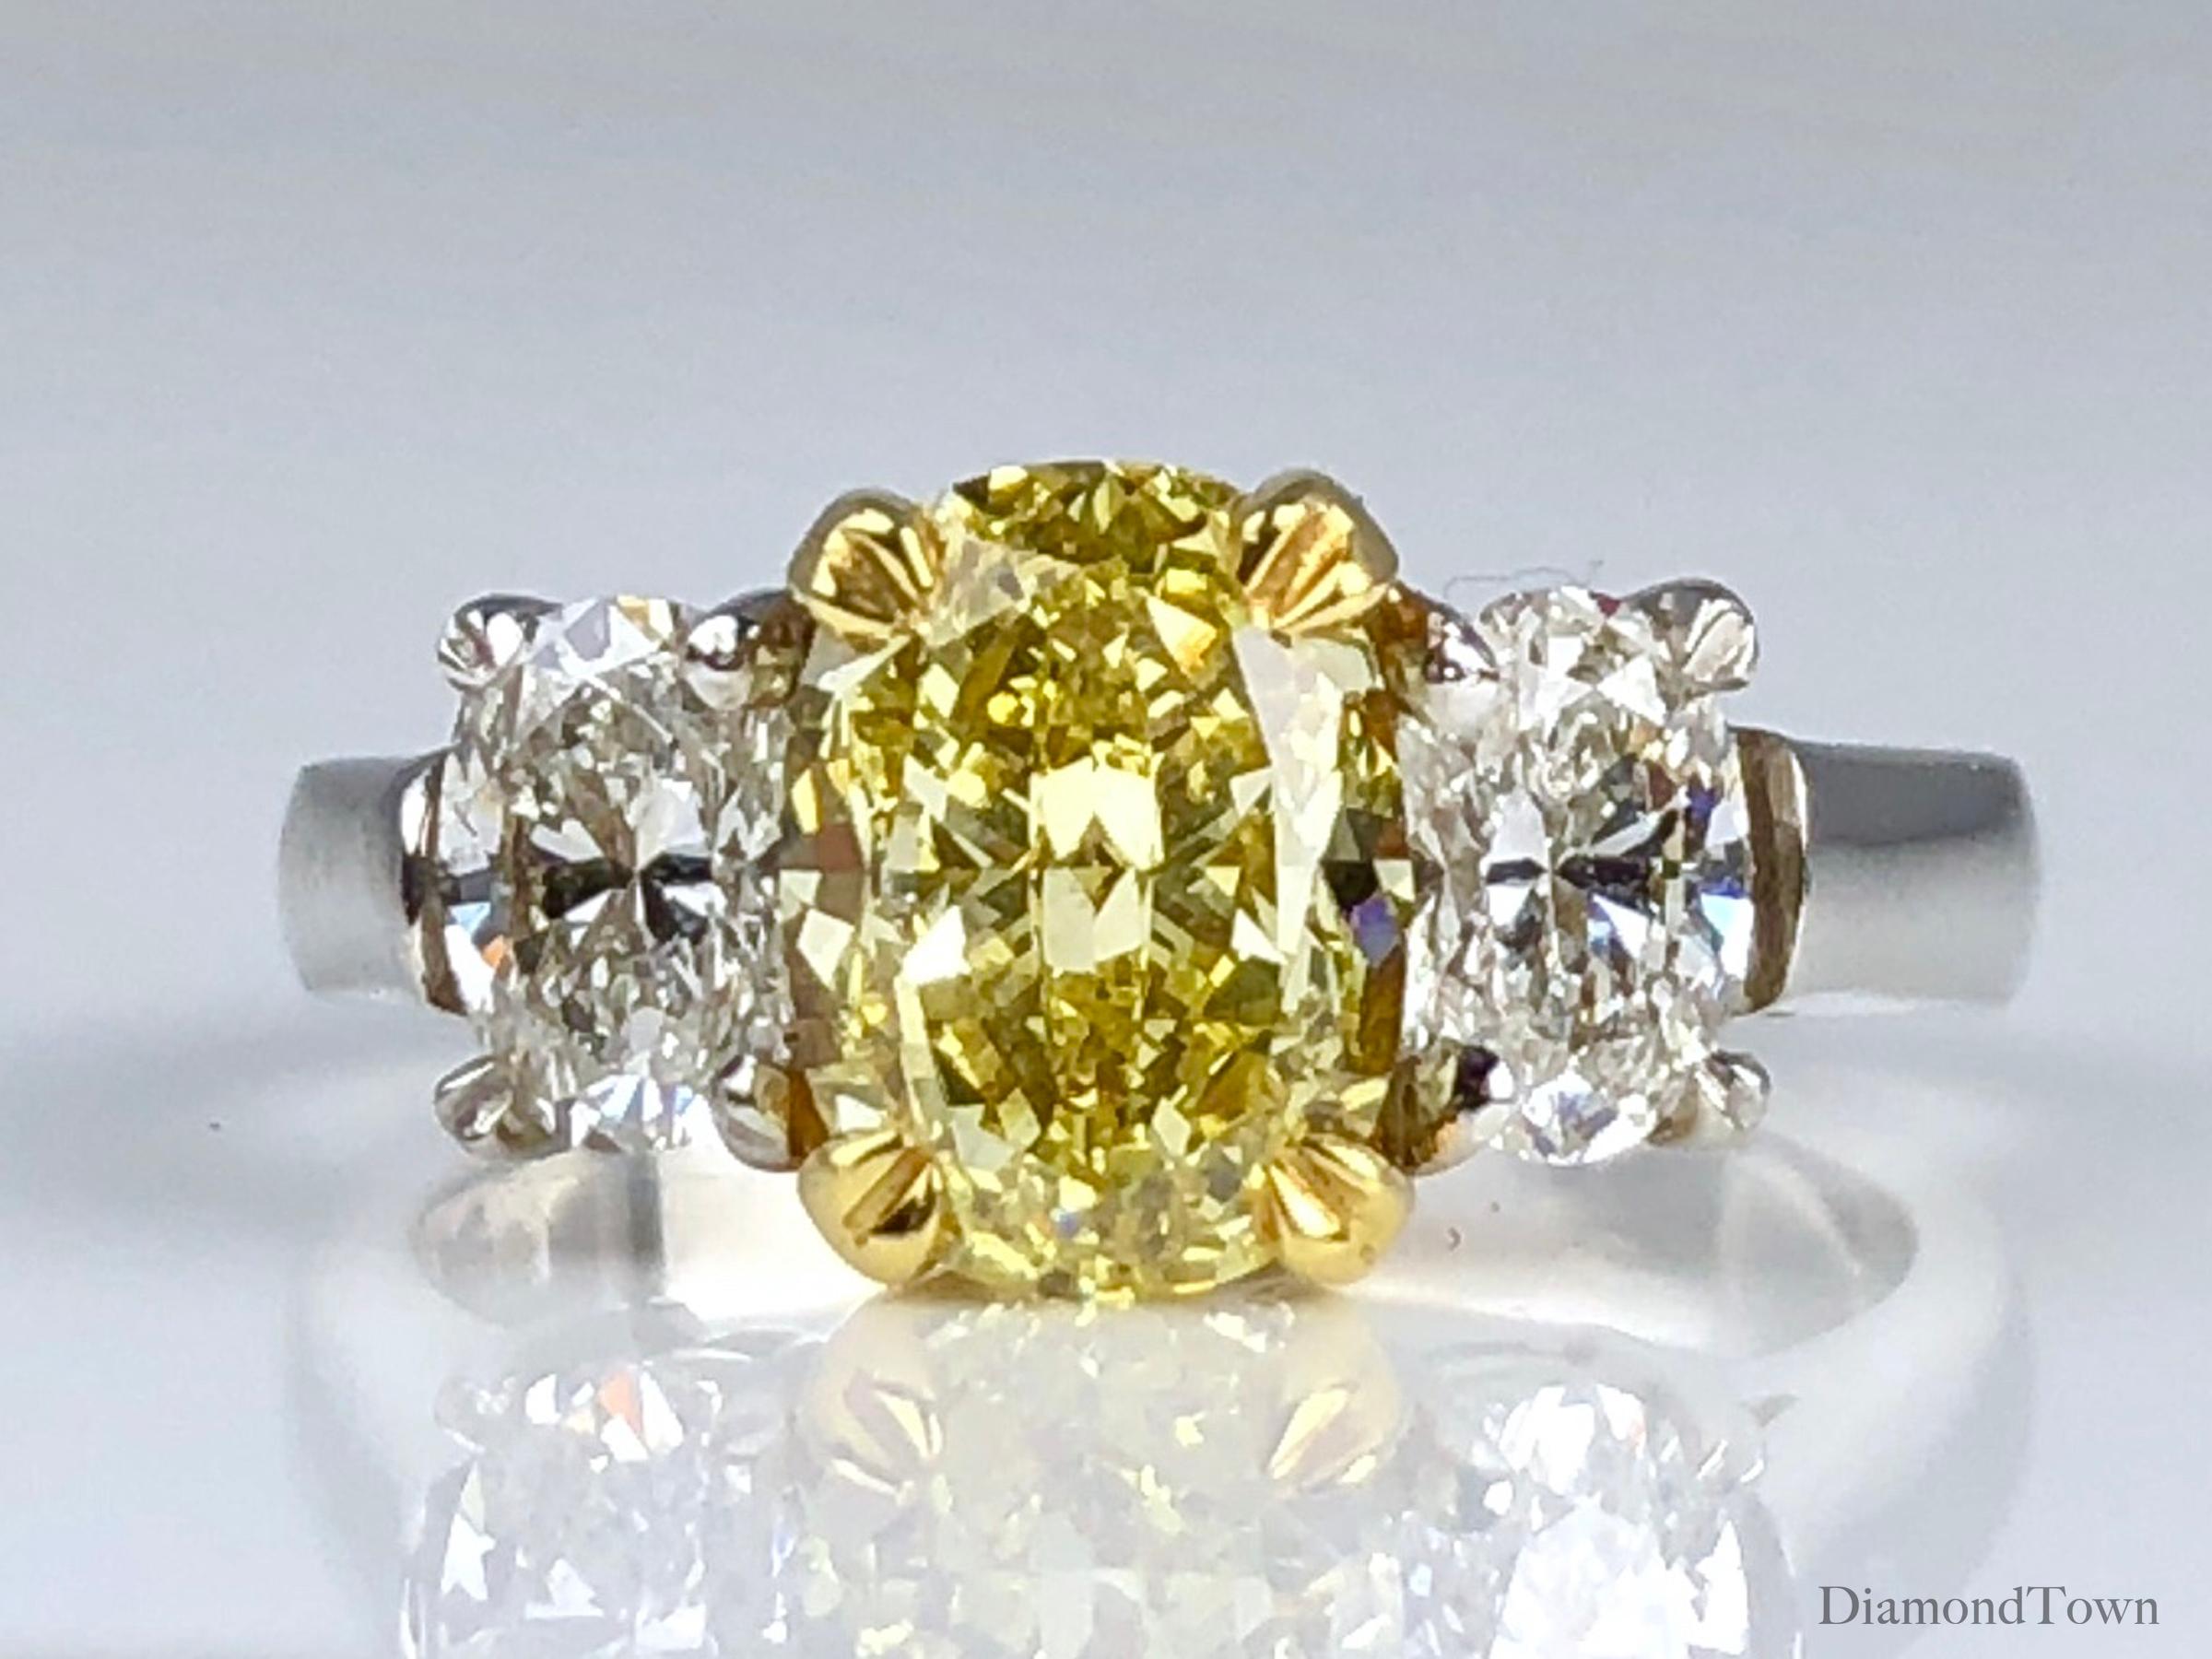 Contemporary GIA Certified 2.01 Carat Natural Fancy Intense Yellow Diamond Ring ref124 For Sale